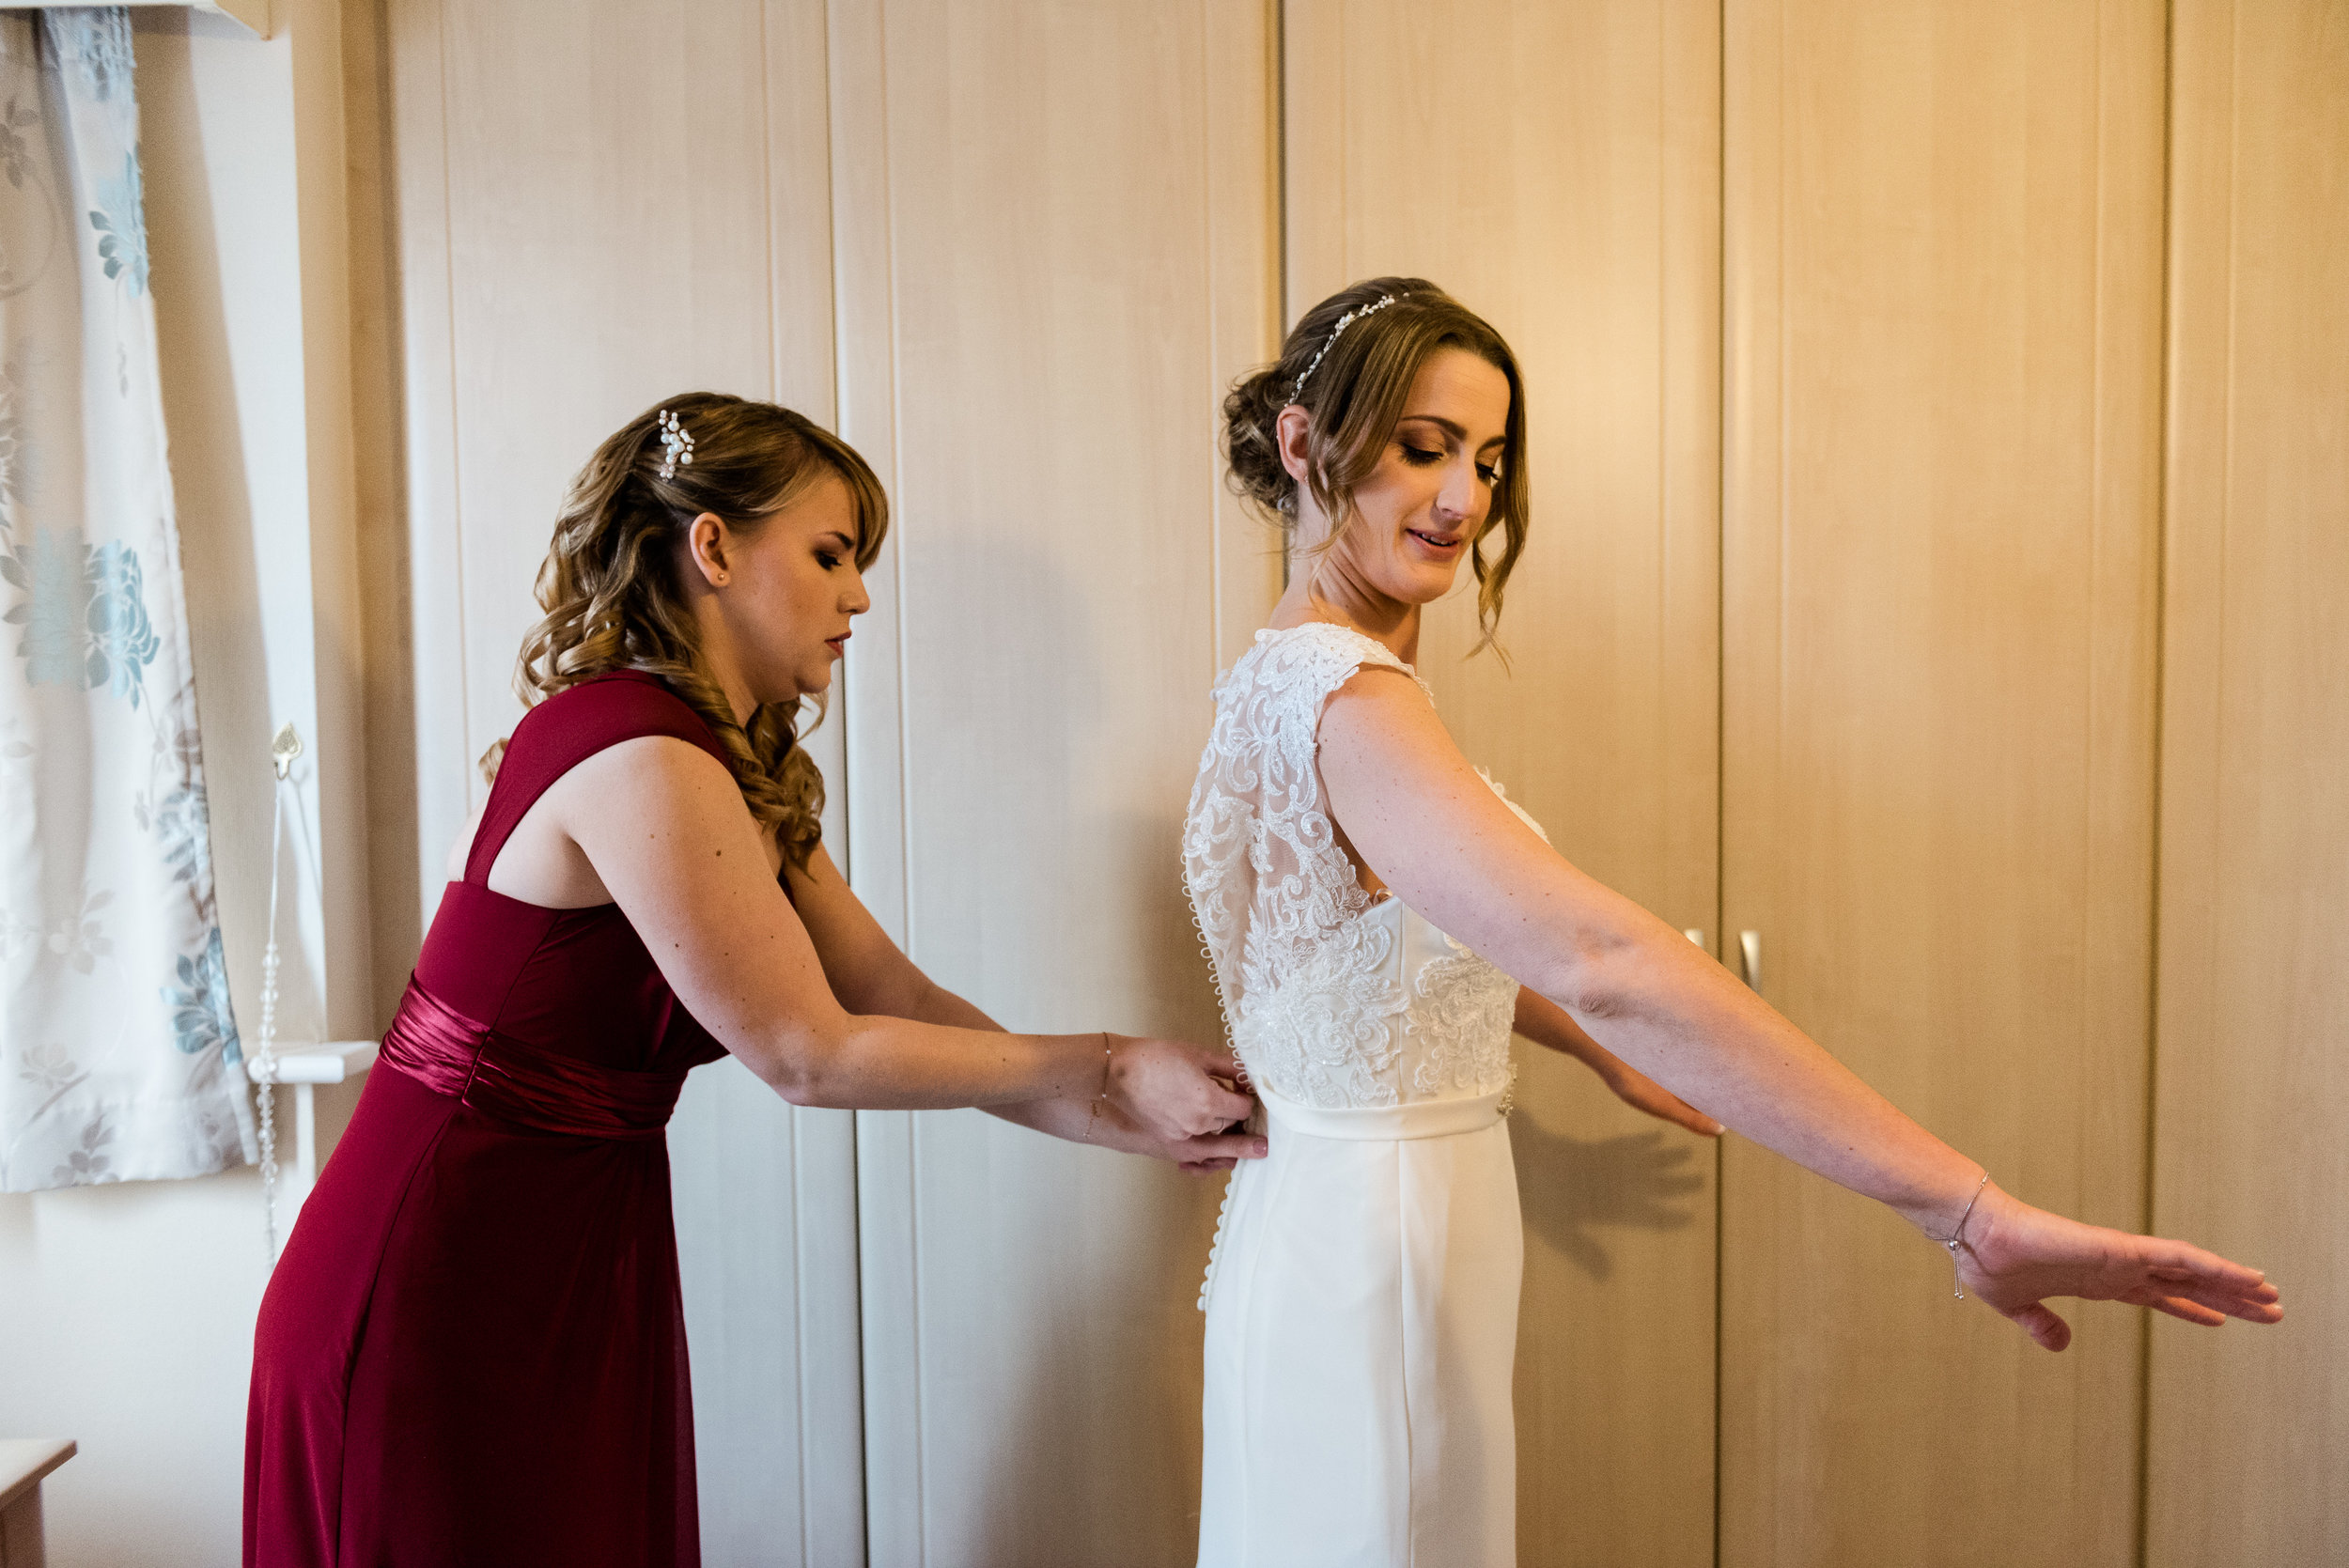 Birmingham Documentary Wedding Photography at New Hall, Sutton Coldfield Turkish Red Candid Reportage - Jenny Harper-10.jpg